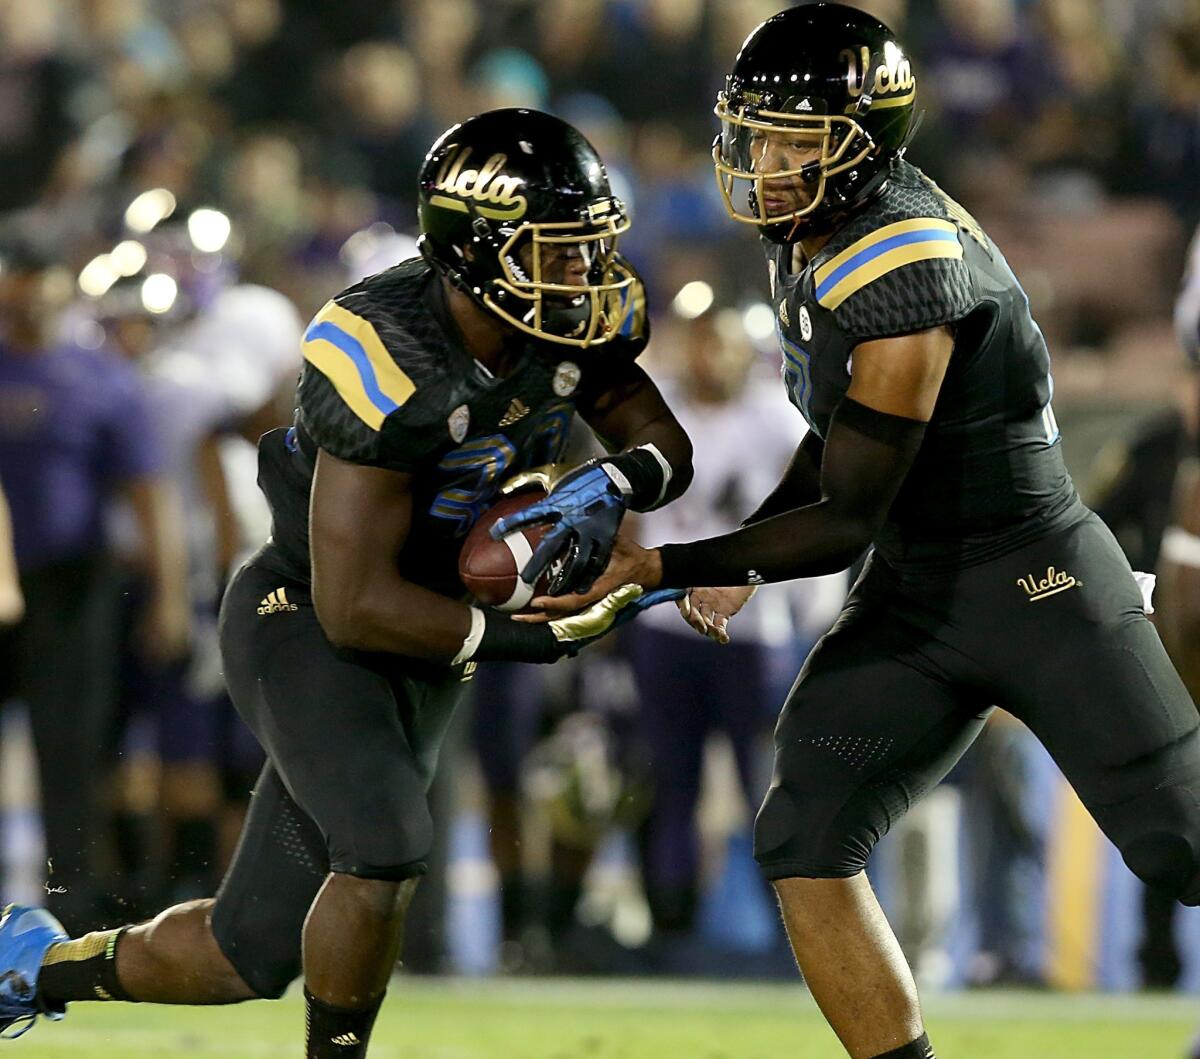 UCLA quarterback Brett Hundley hands off to Myles Jack during the Bruins' victory over Washington on Friday.